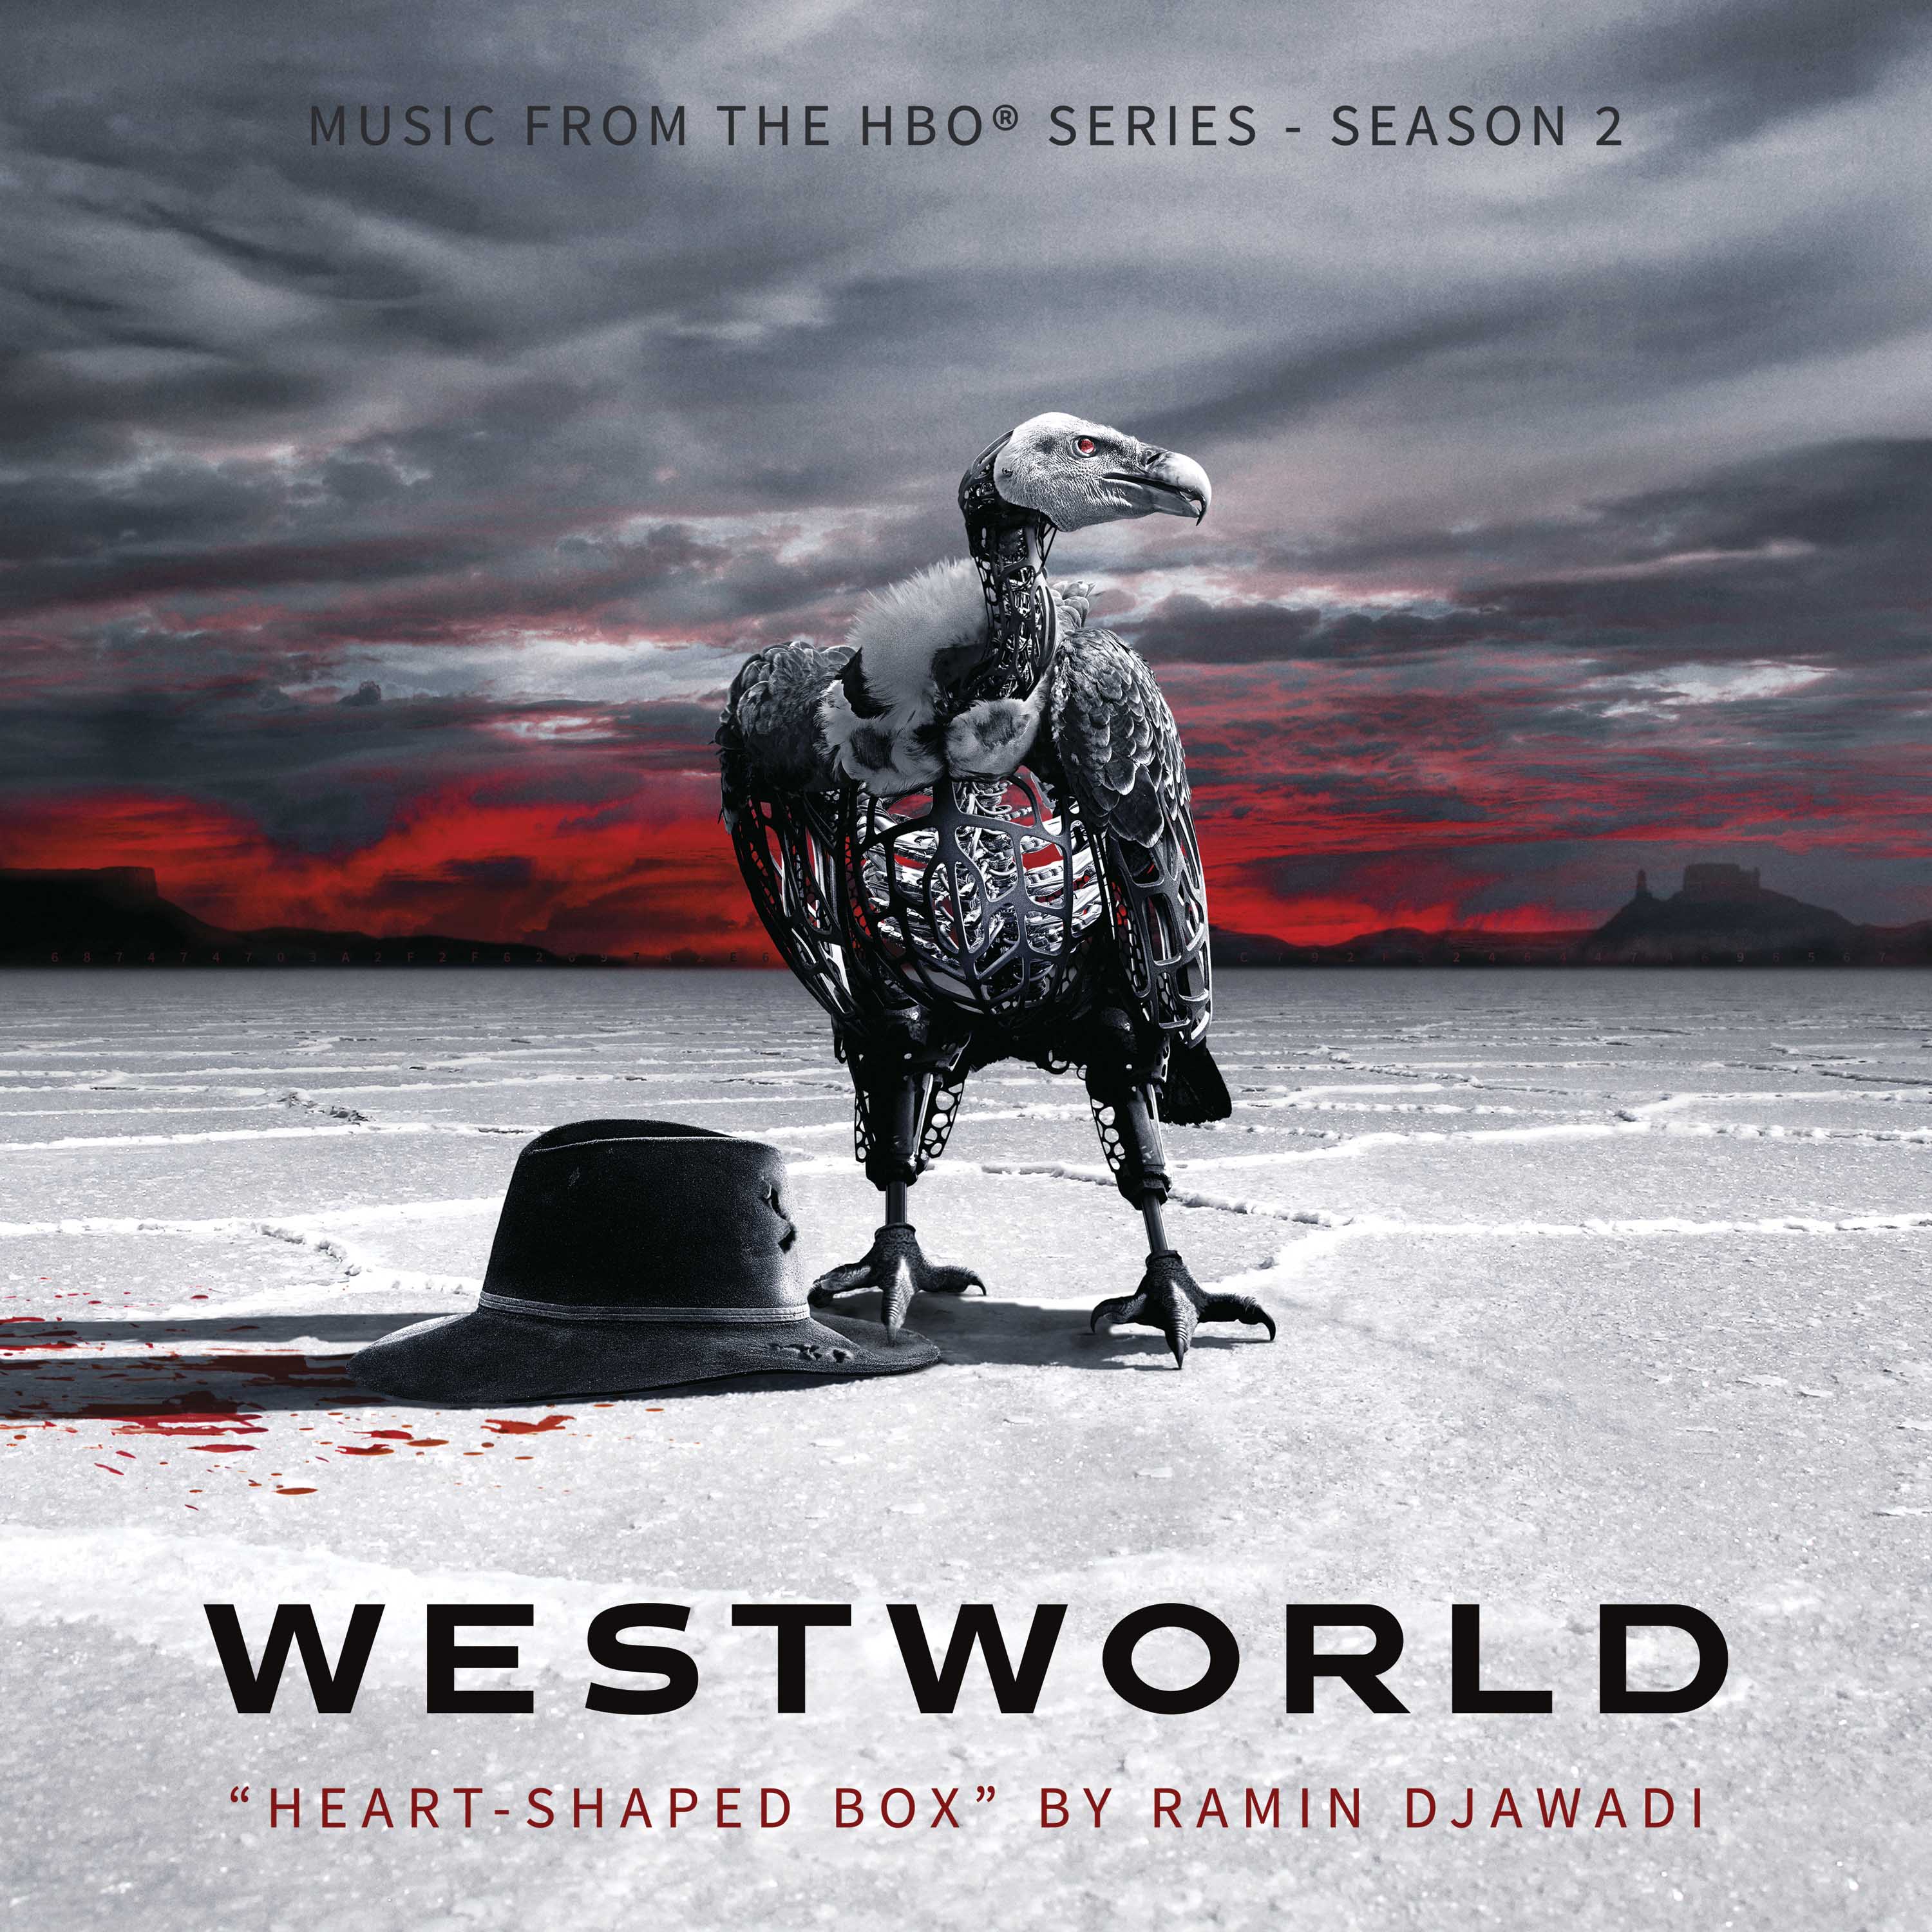 NEW MUSIC FROM WESTWORLD SEASON 2 NOW AVAILABLE HEAR “HEART-SHAPED BOX” AS HEARD IN THE OFFICIAL WESTWORLD SEASON TWO TRAILER MUSIC BY MULTI GRAMMY®- AND EMMY® AWARD–NOMINATED COMPOSER RAMIN DJAWADI